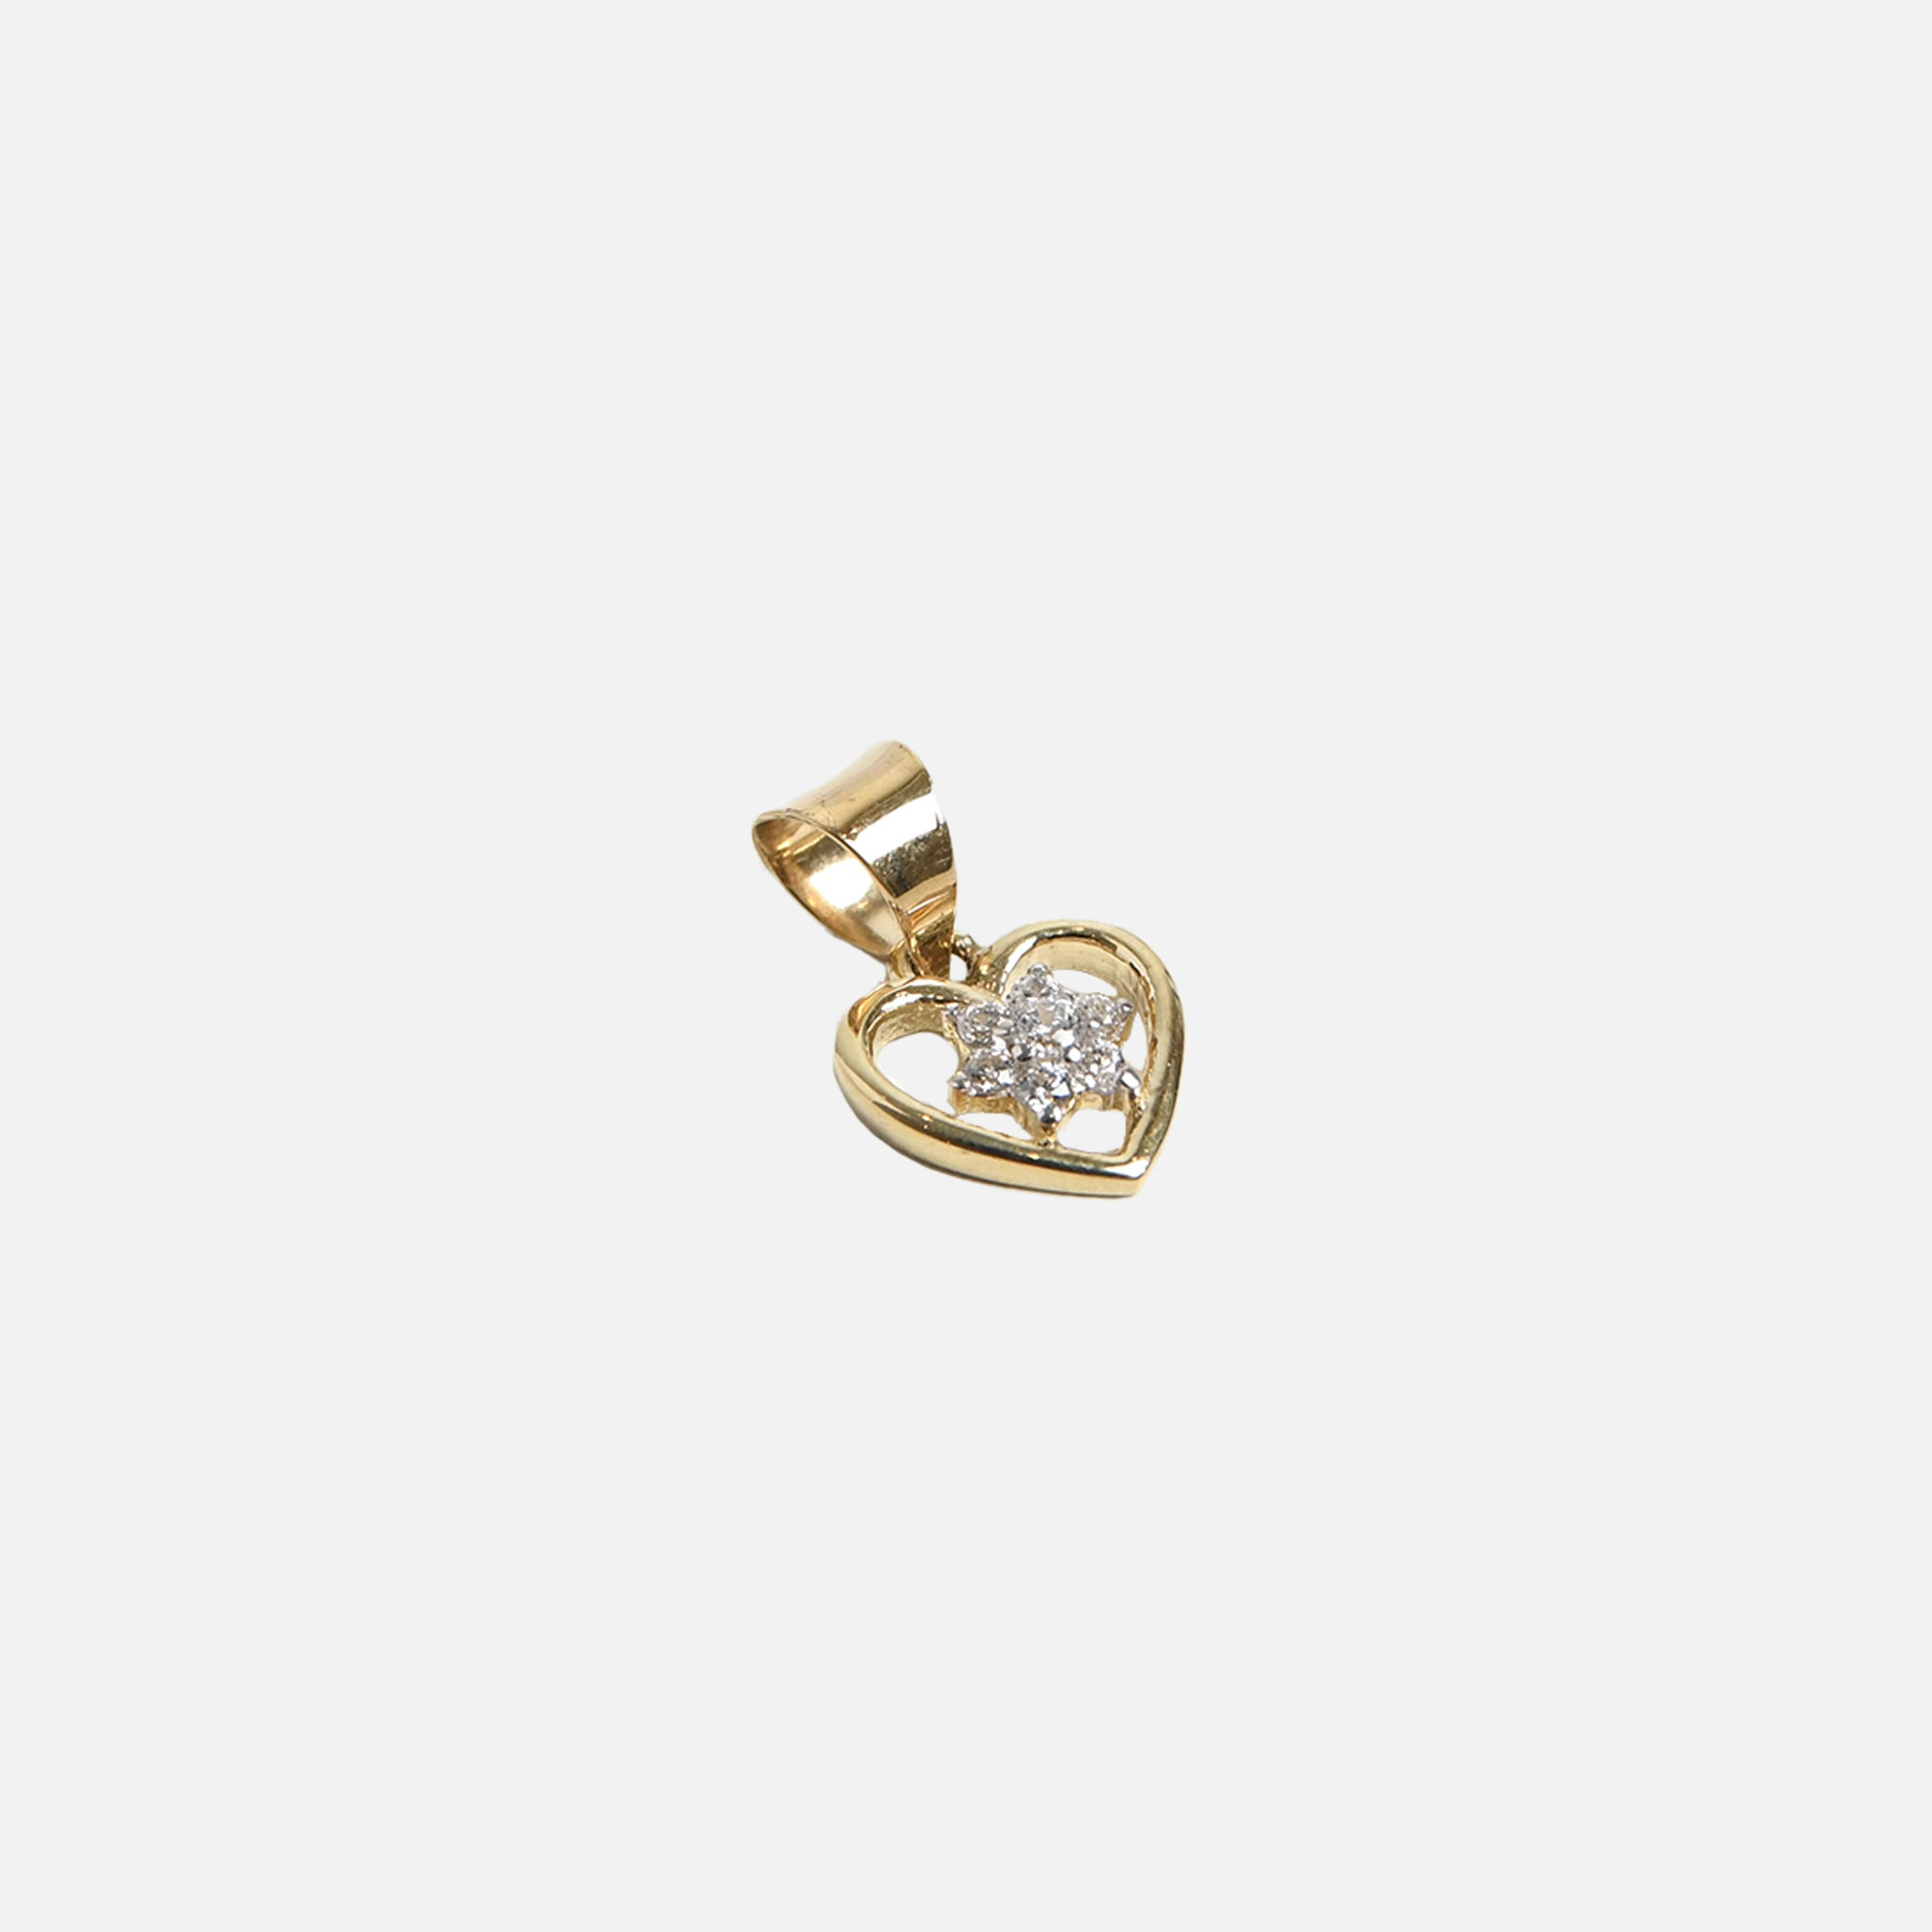 10k yellow gold heart charm with center stone